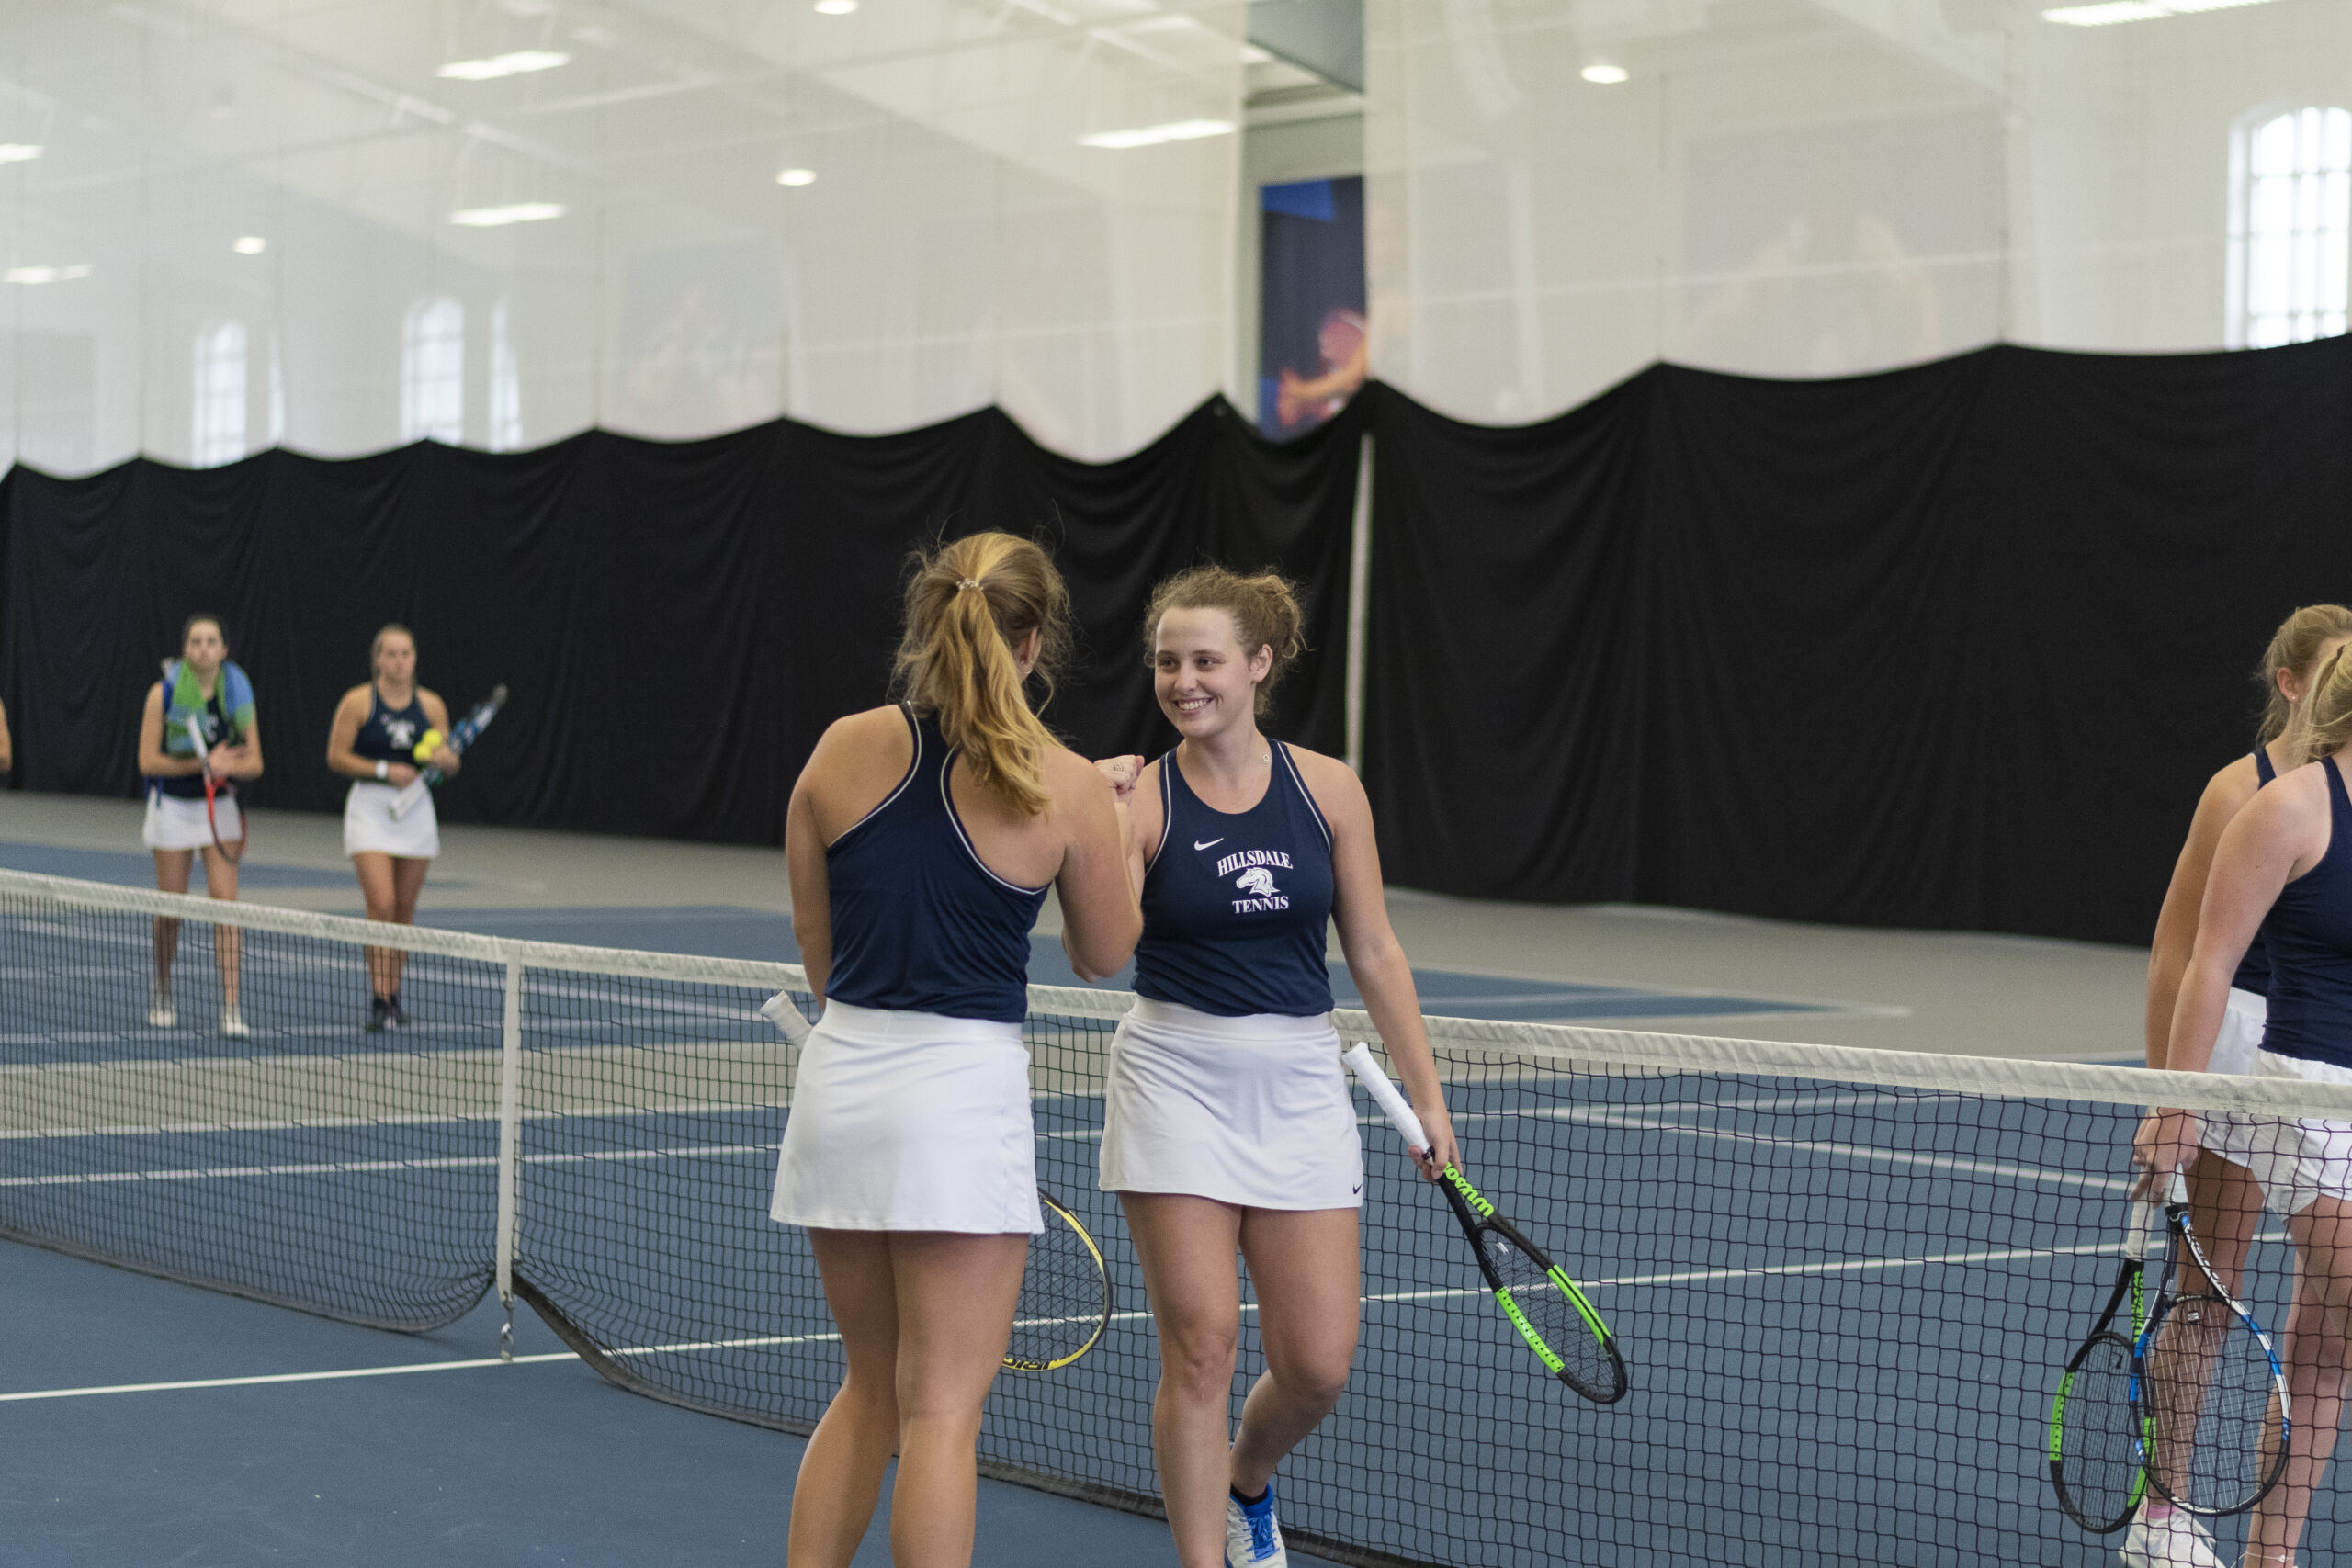 Hillsdale sweeps matches, Hackman earns award